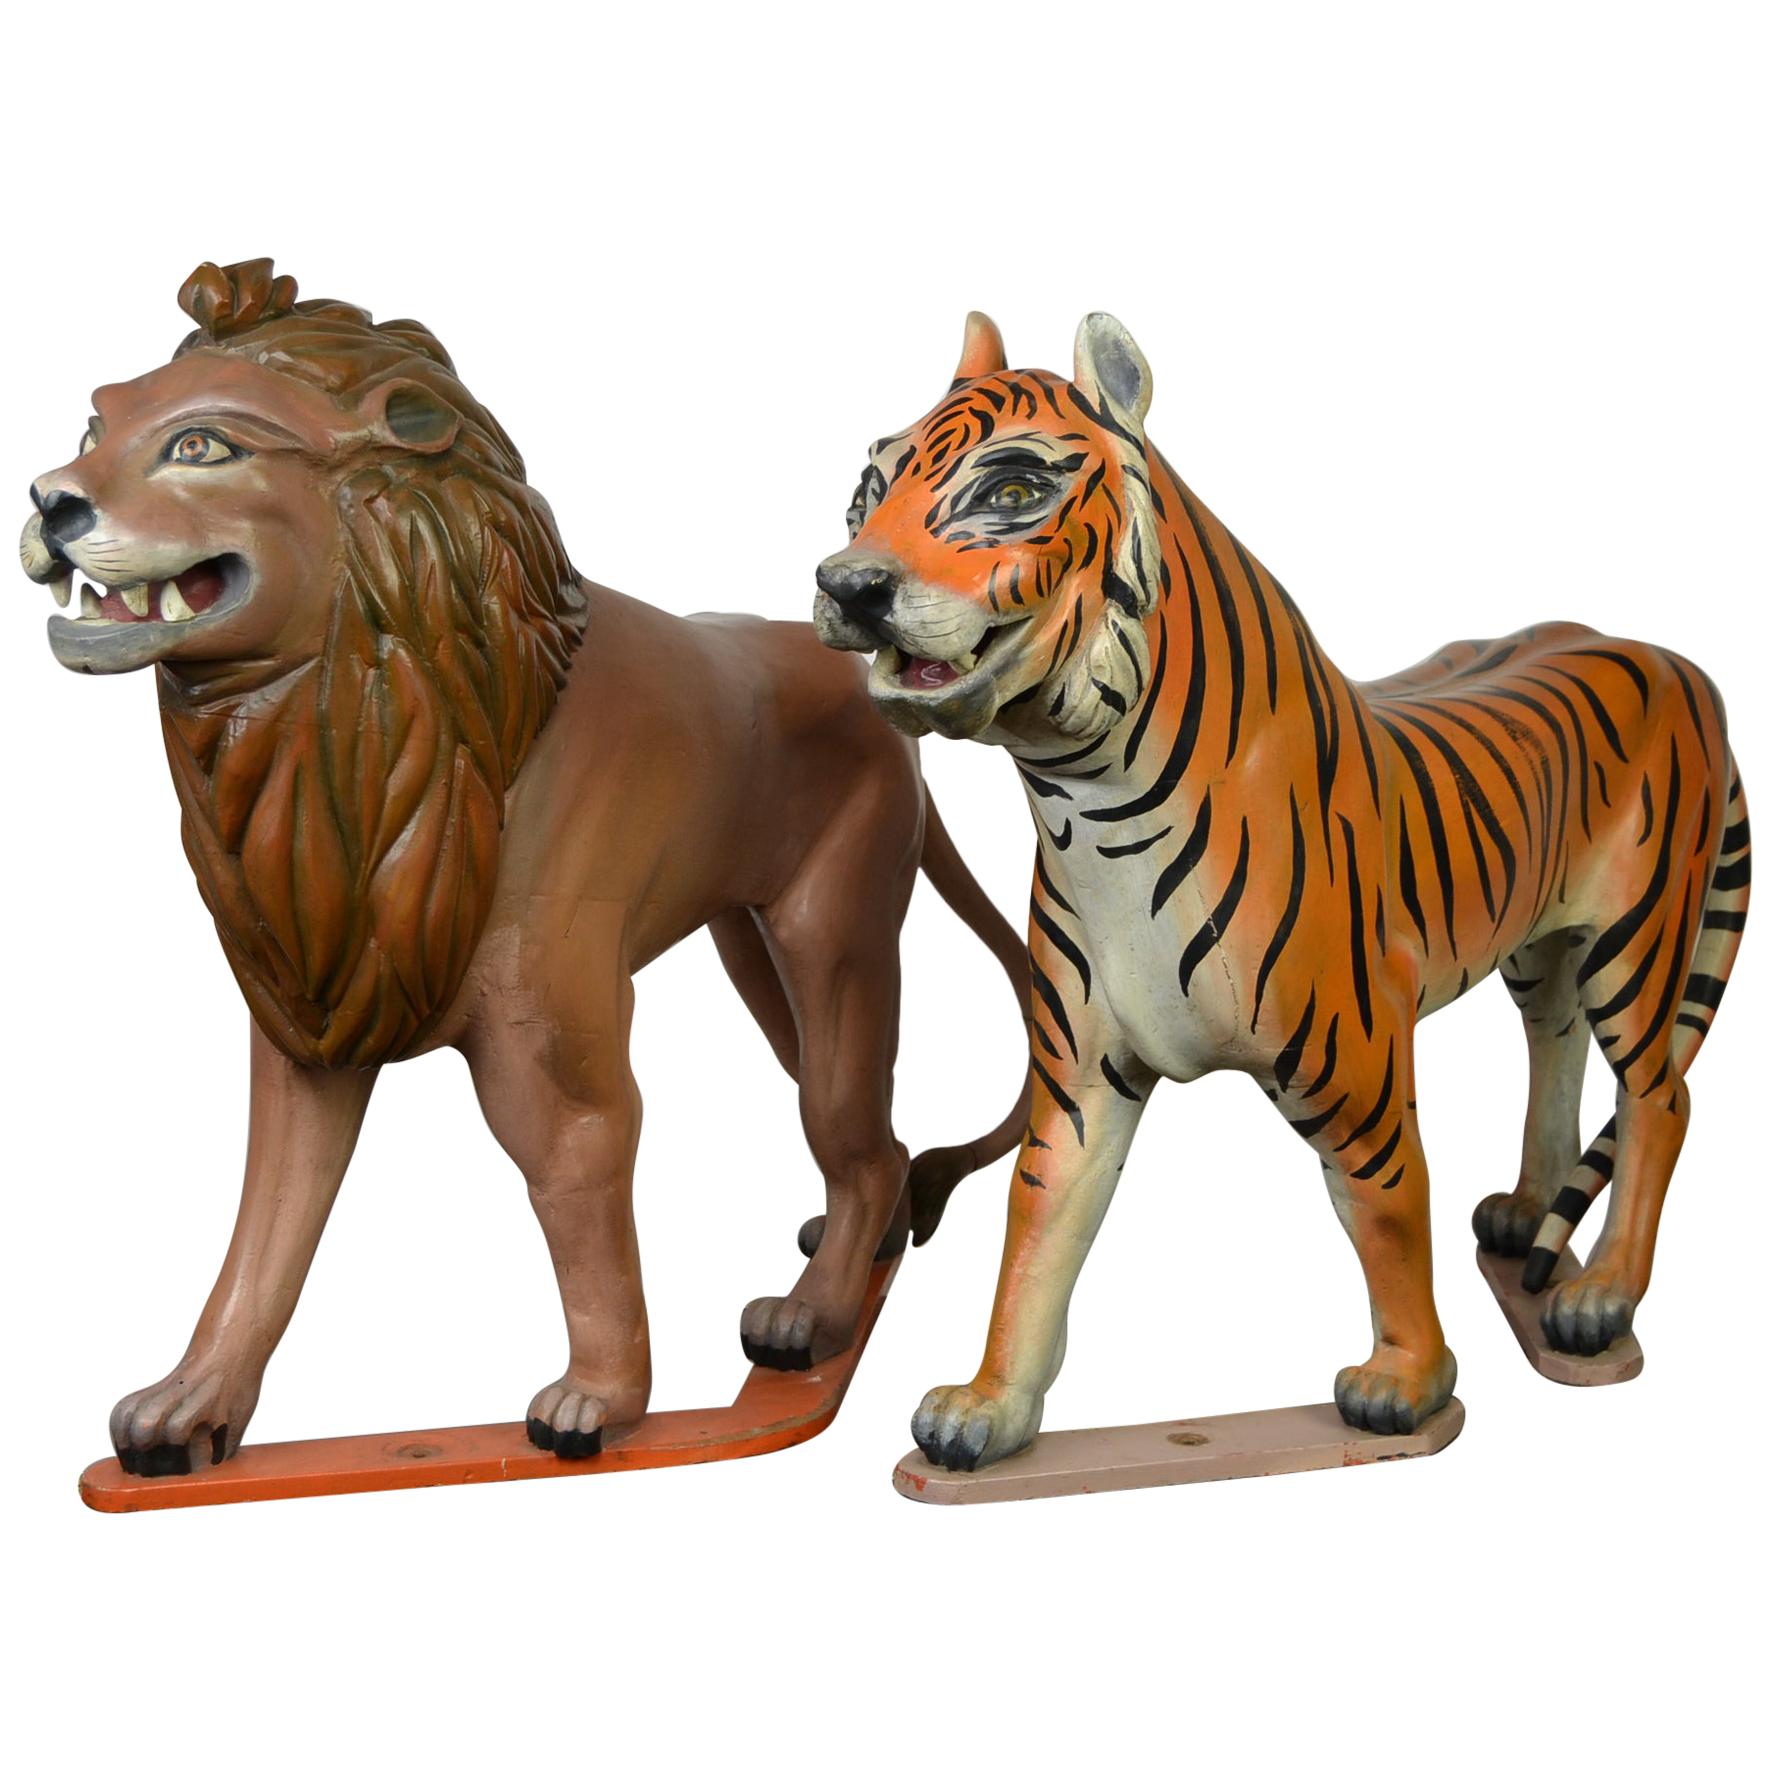 Lion and Tiger Sculptures from Carousel, Wood, Europe, Mid-20th Century